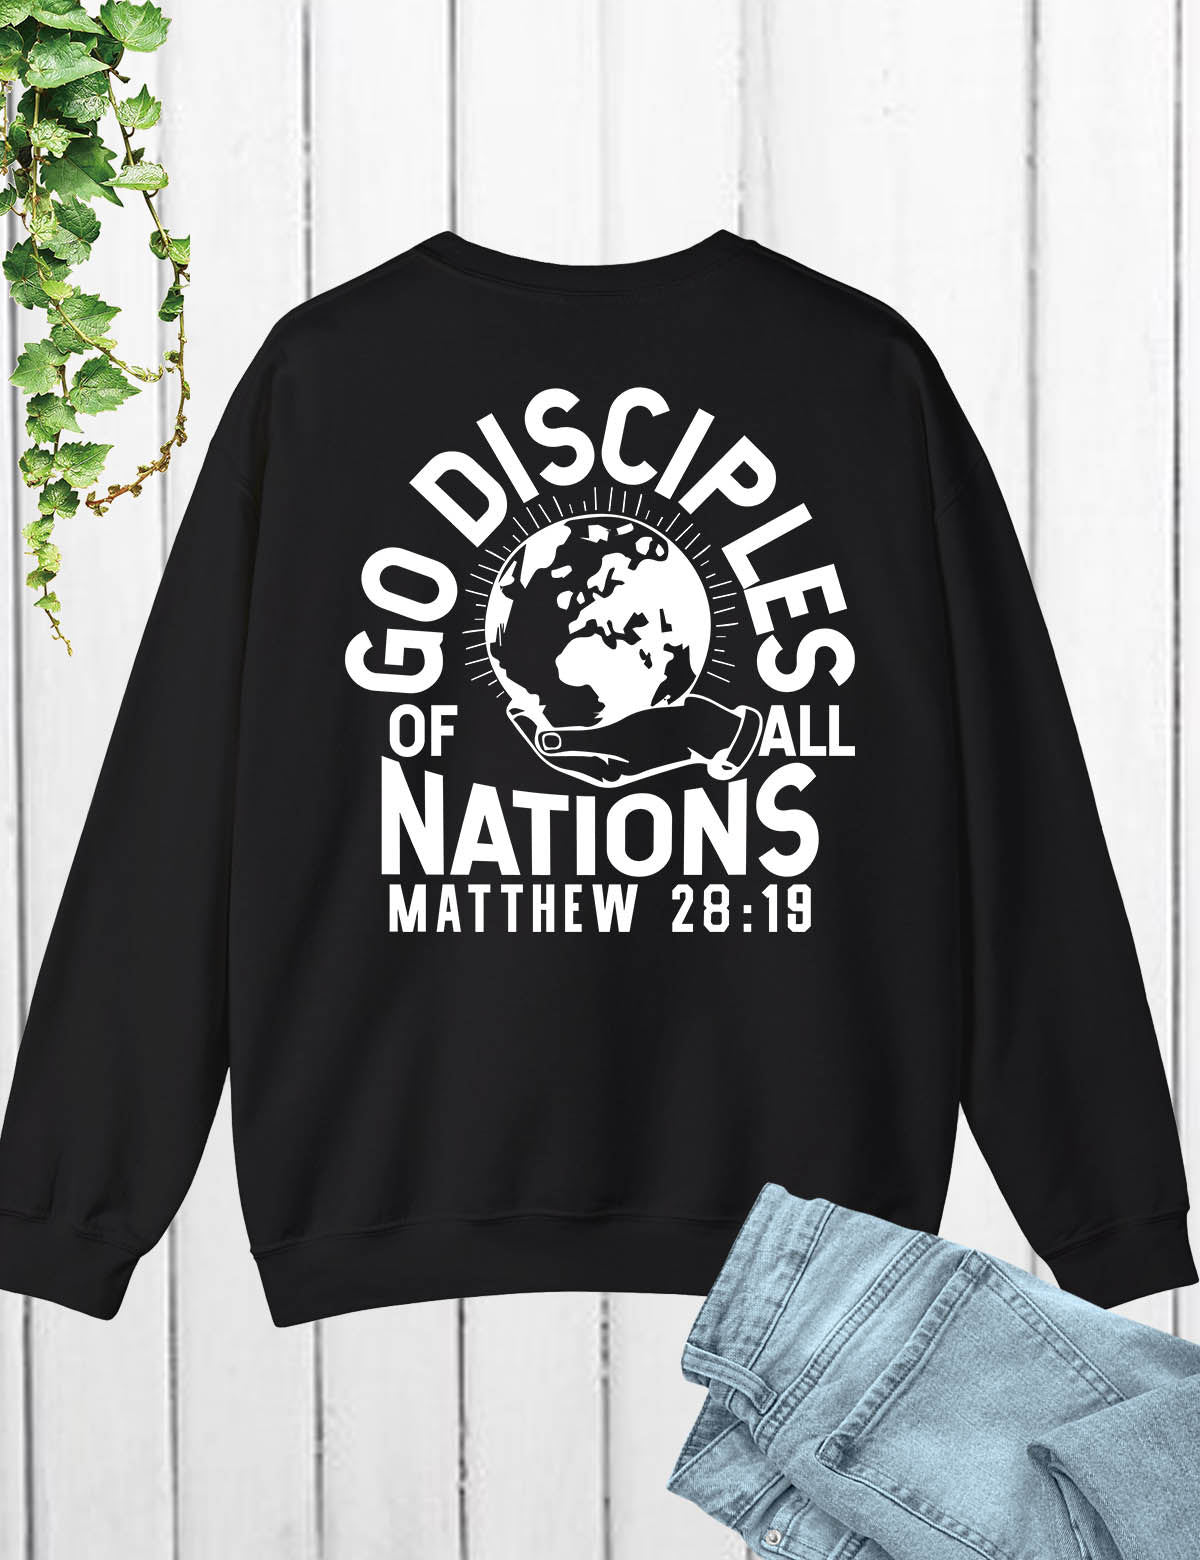 Go And Make Disciples Of All Nations Bible Verse Sweatshirt